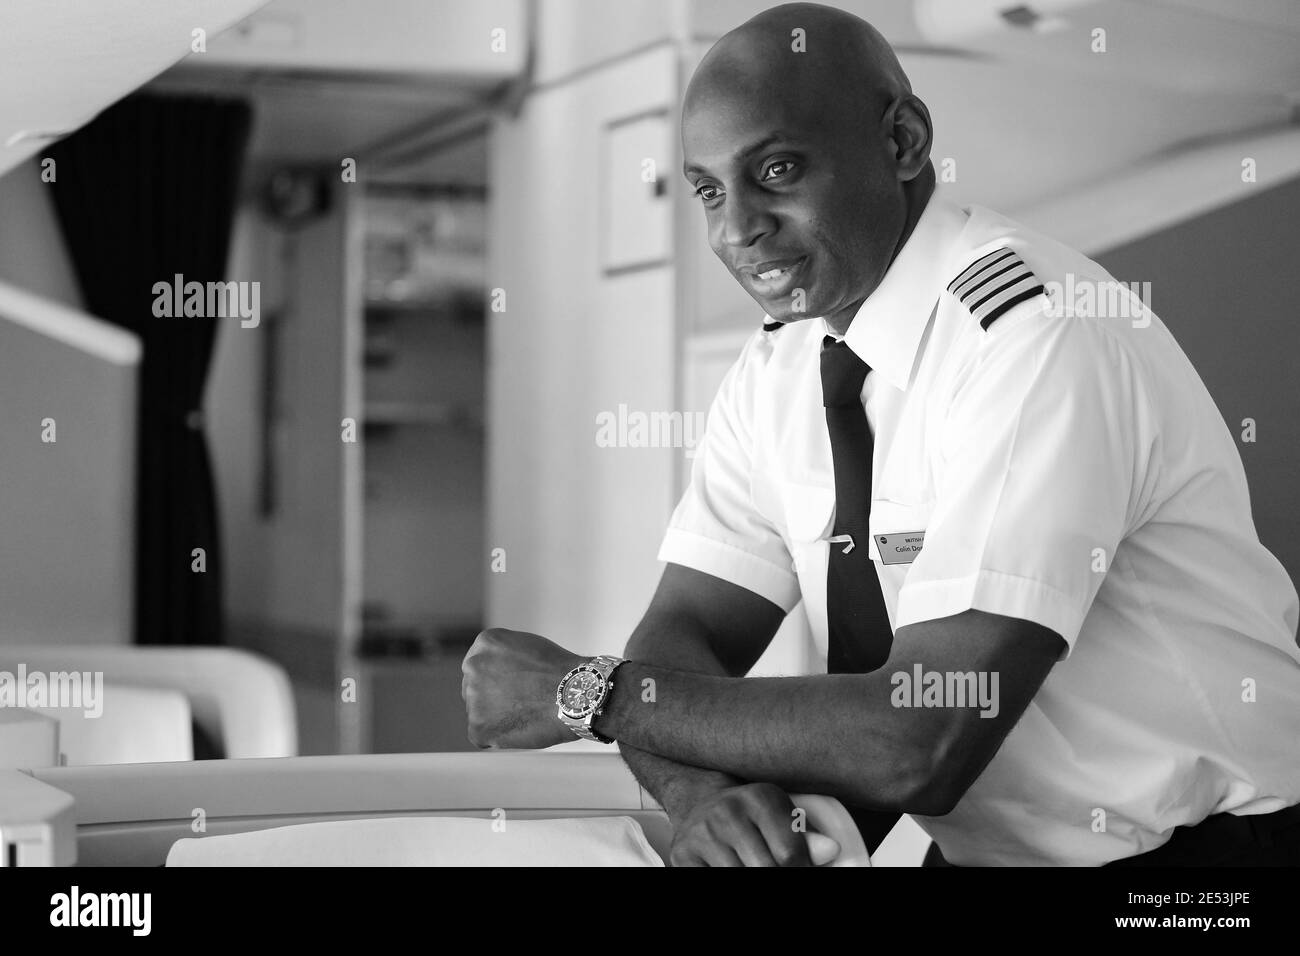 JOHANNESBURG, SOUTH AFRICA - Jan 06, 2021: Johannesburg, South Africa - May 08 2012: British Airways Middle Aged Africam Male Captain Pilot Stock Photo